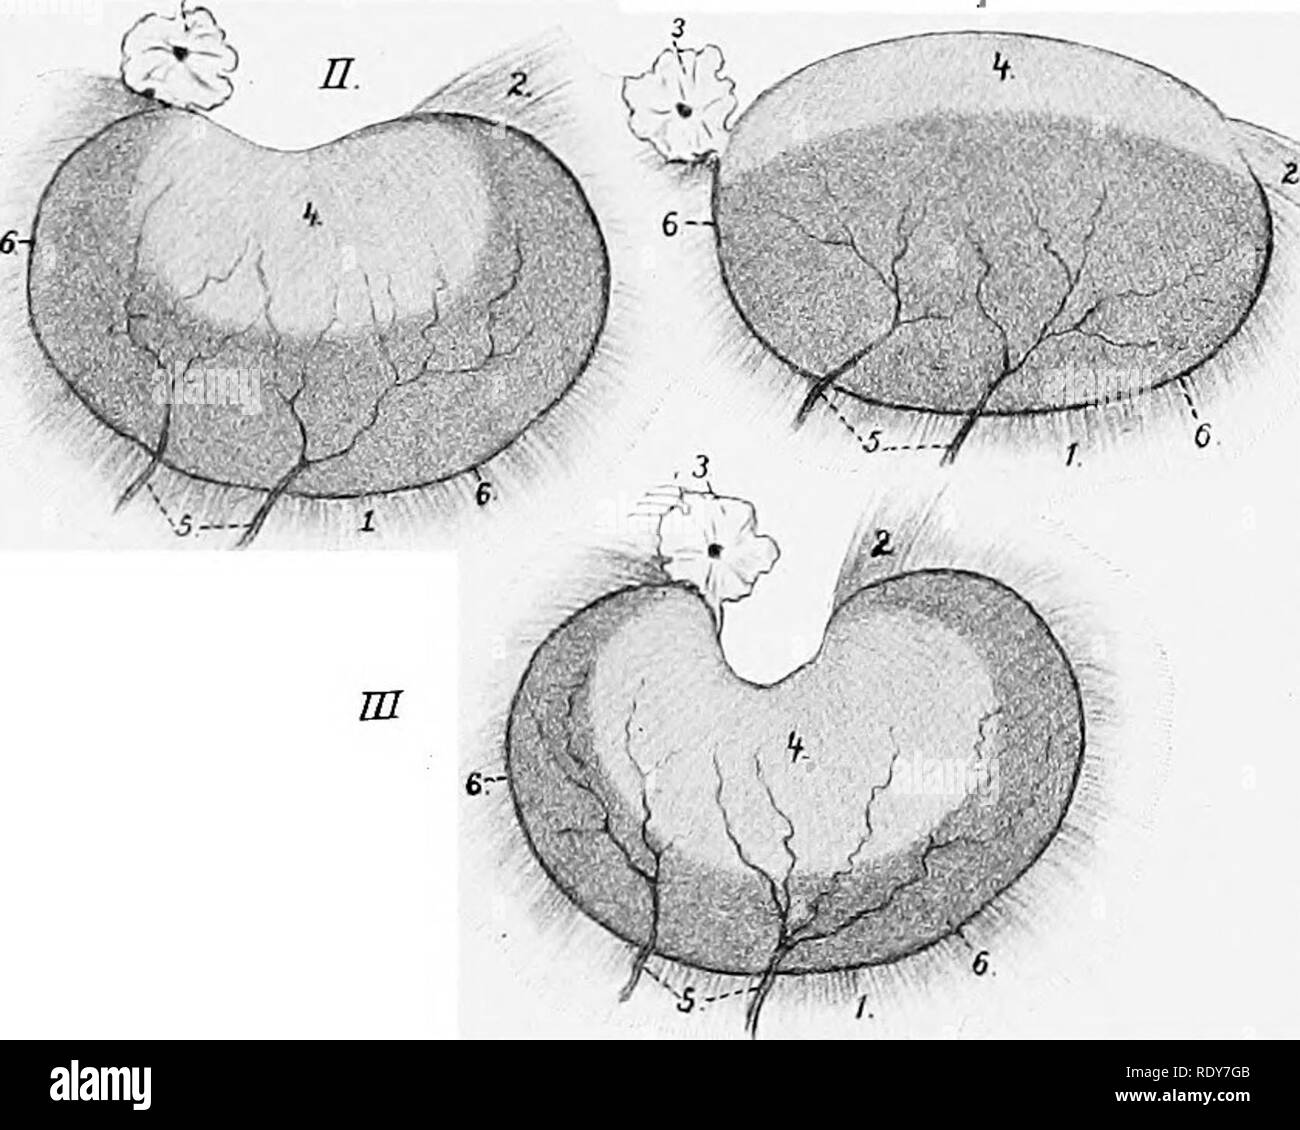 . The anatomy of the domestic animals . Veterinary anatomy. 598 GENITAL ORGANS OP THE MAEE The stroma of the ovary (Stroma ovarii) is a network of connective tissue. In the meshes of the stroma there are (in young subjects) numerous ovisacs or folliculi oophori, containing ova (Ovula) in various stages of development. The immature ovum is surrounded by foUicle cells; those more advanced in development are enclosed by several (5-8) layers of follicle cells, forming the stratum granulosum, and by a condensation of the stroma termed the theca folliculi; within the theca is a quantity of fluid, th Stock Photo